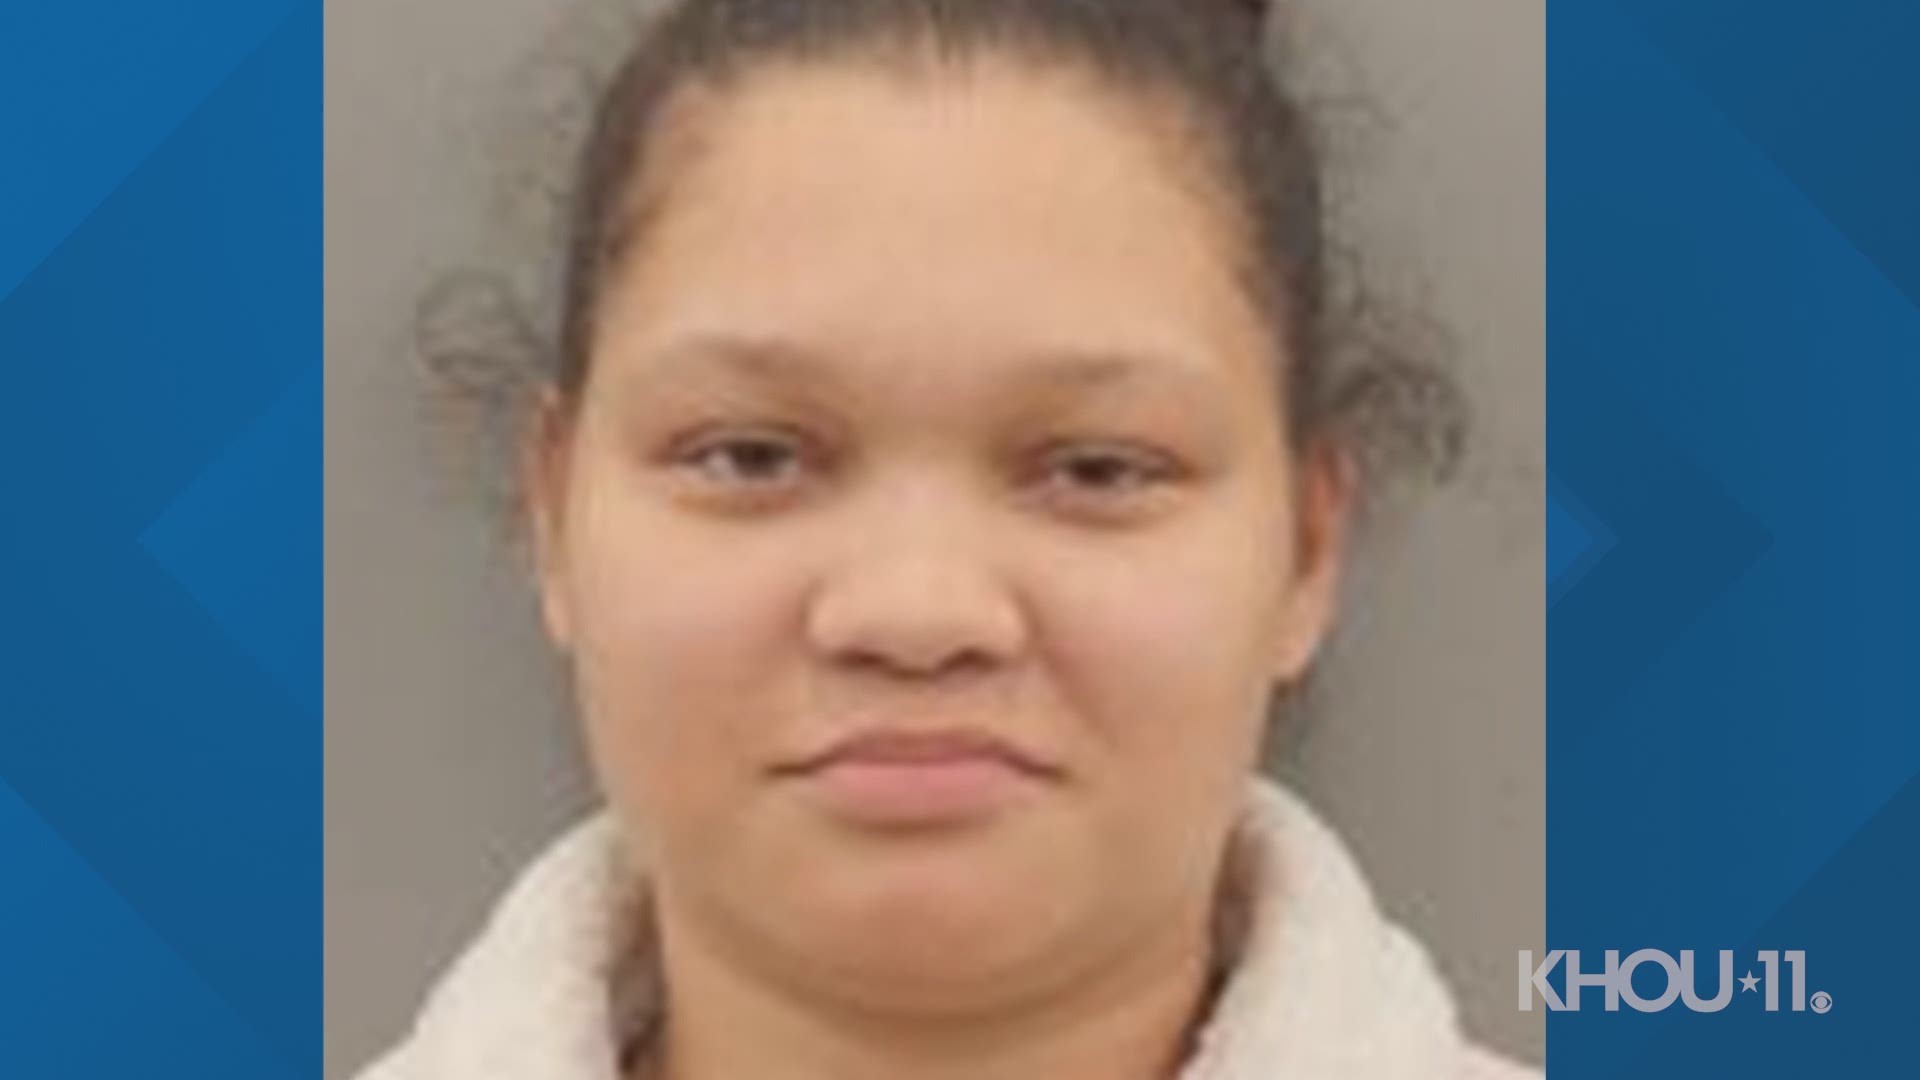 Stephanie Hunter, 27, was arrested in early February after an investigation in the Spring area, according to the Harris County Pct. 1 Constable’s Office.